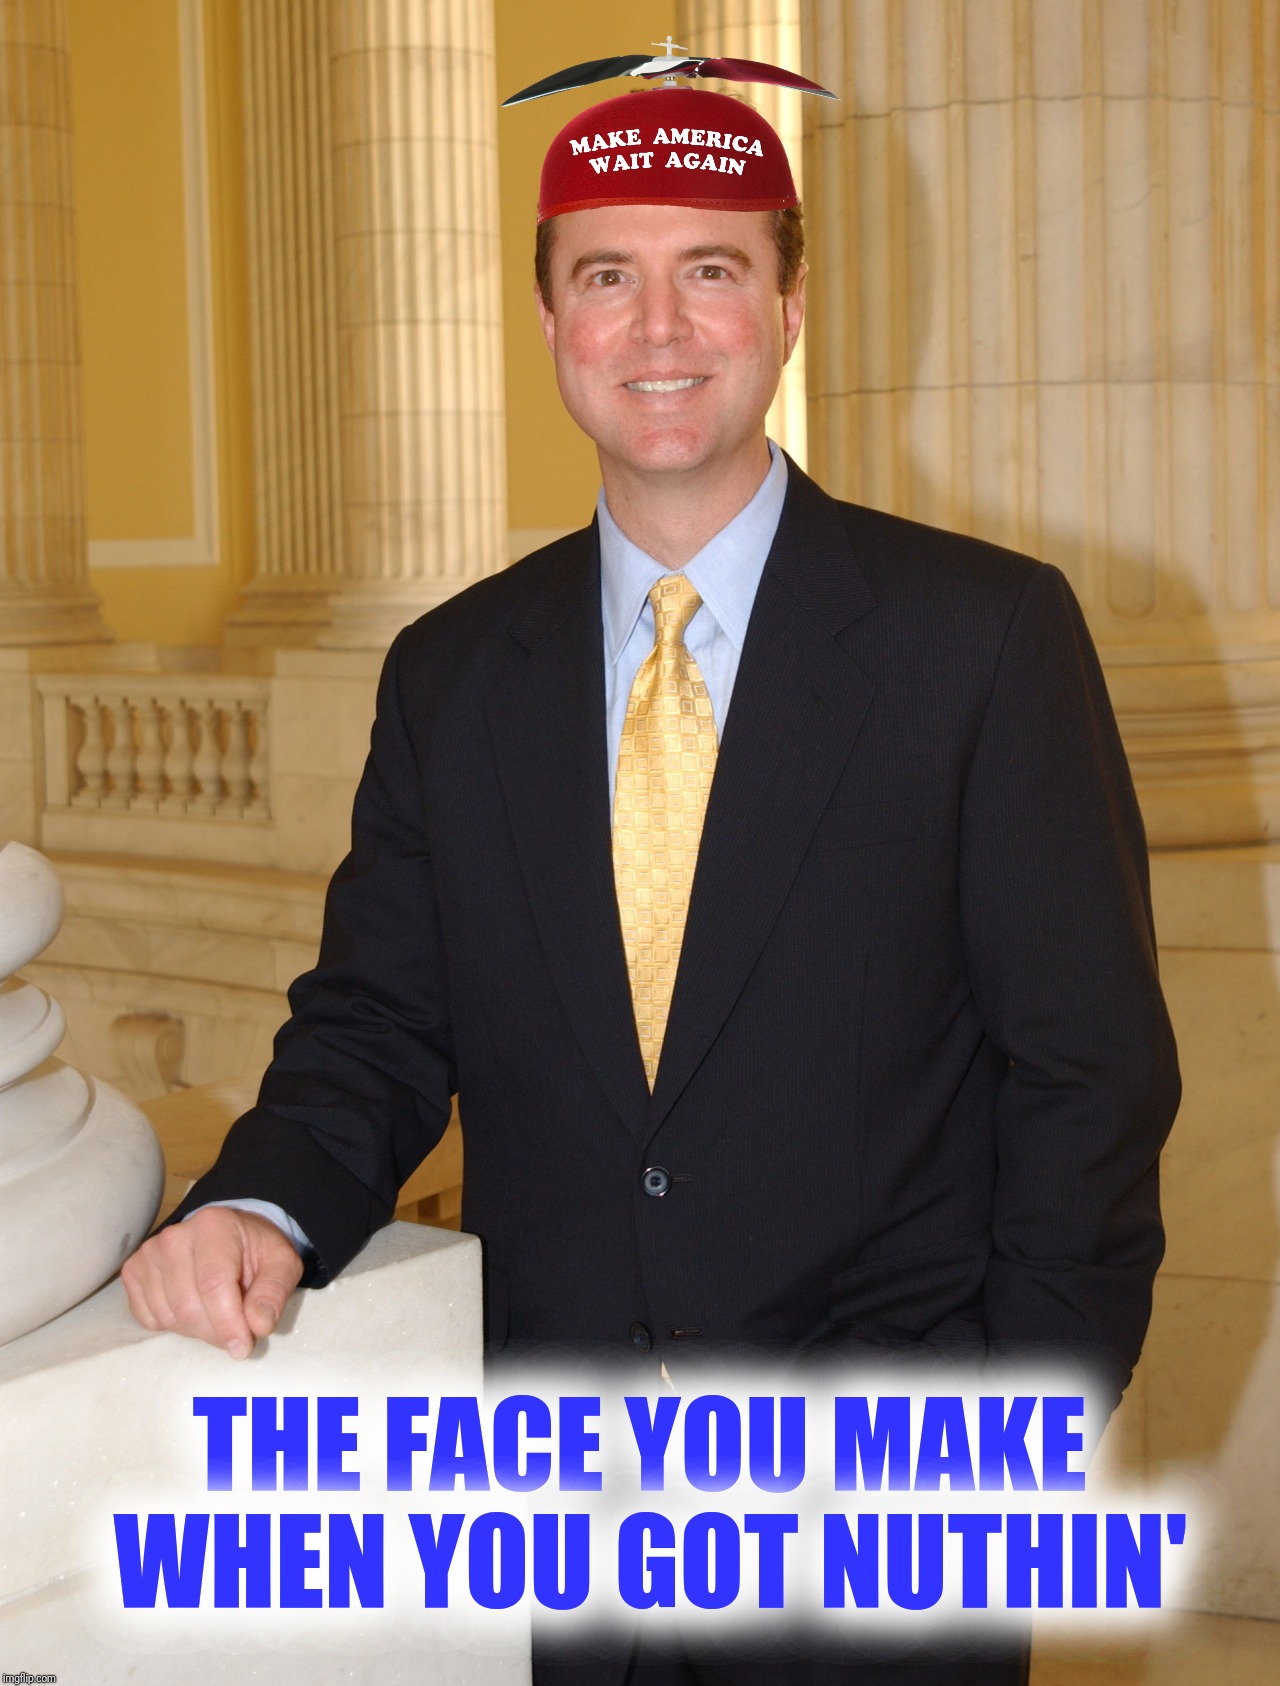 Bad Photoshop Sunday presents:  It could be his hat was two sizes too small! | THE FACE YOU MAKE WHEN YOU GOT NUTHIN' | image tagged in bad photoshop sunday,adam schiff,make america great again,make america wait again,the grinch | made w/ Imgflip meme maker